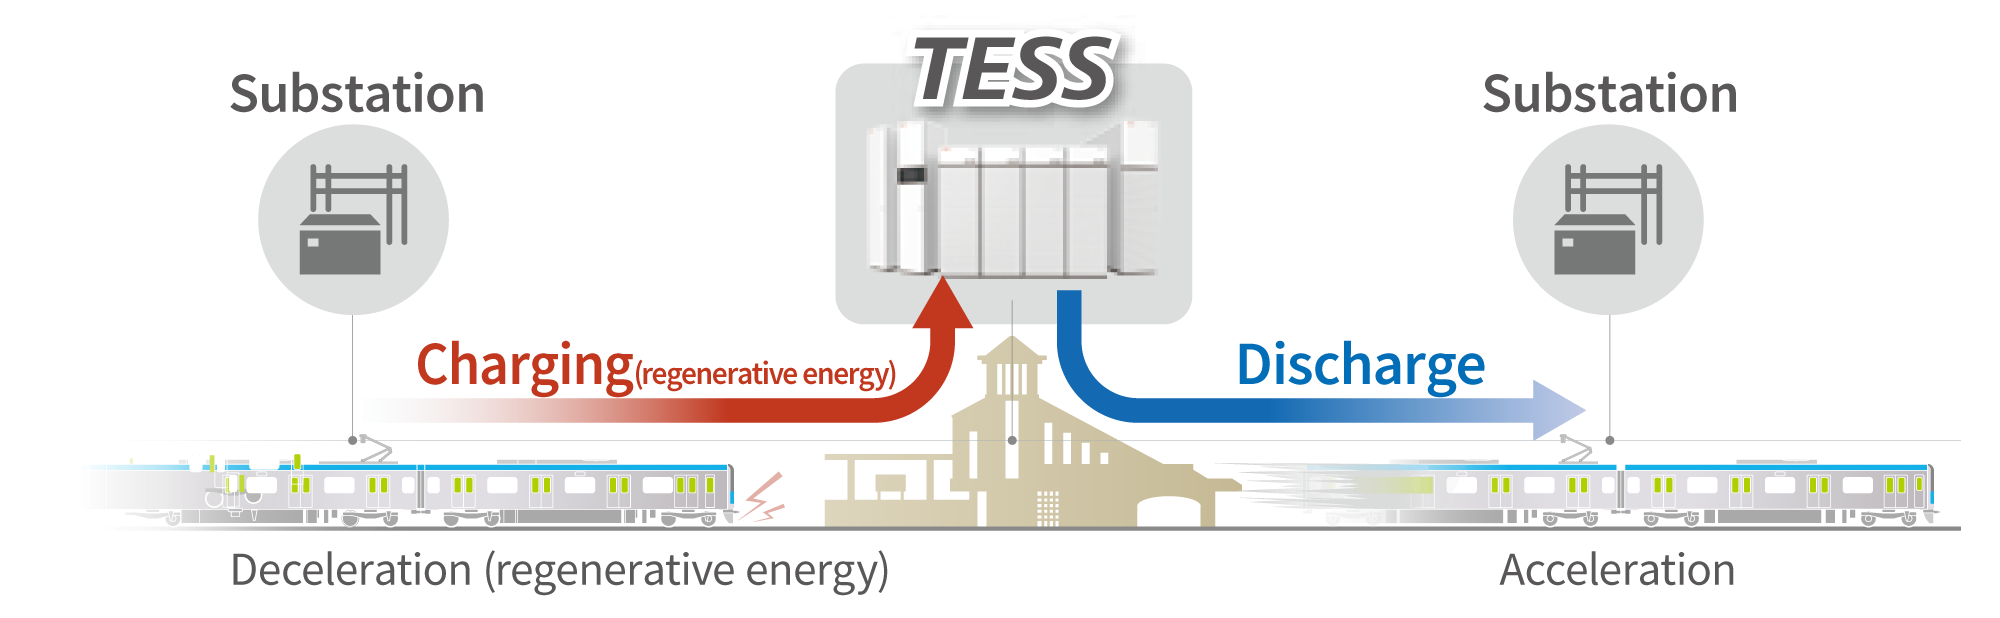 Image of how TESS works